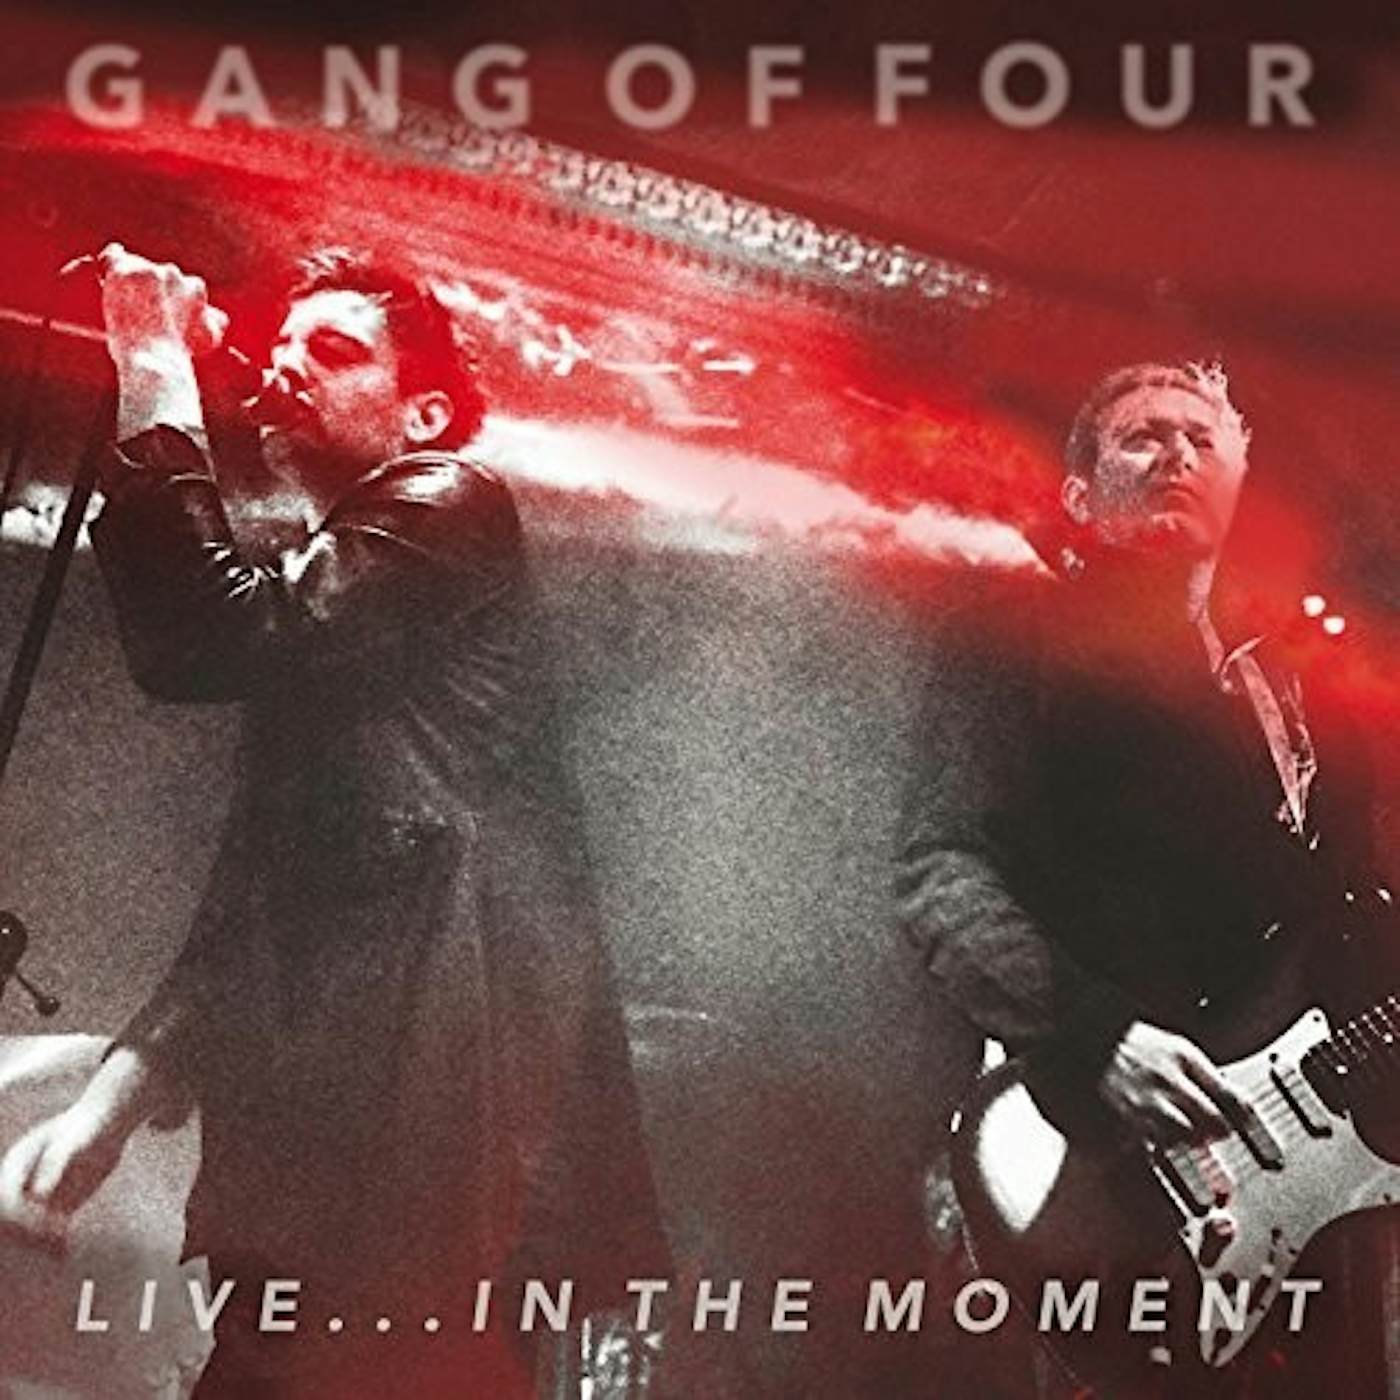 Gang Of Four Live... in the Moment Vinyl Record